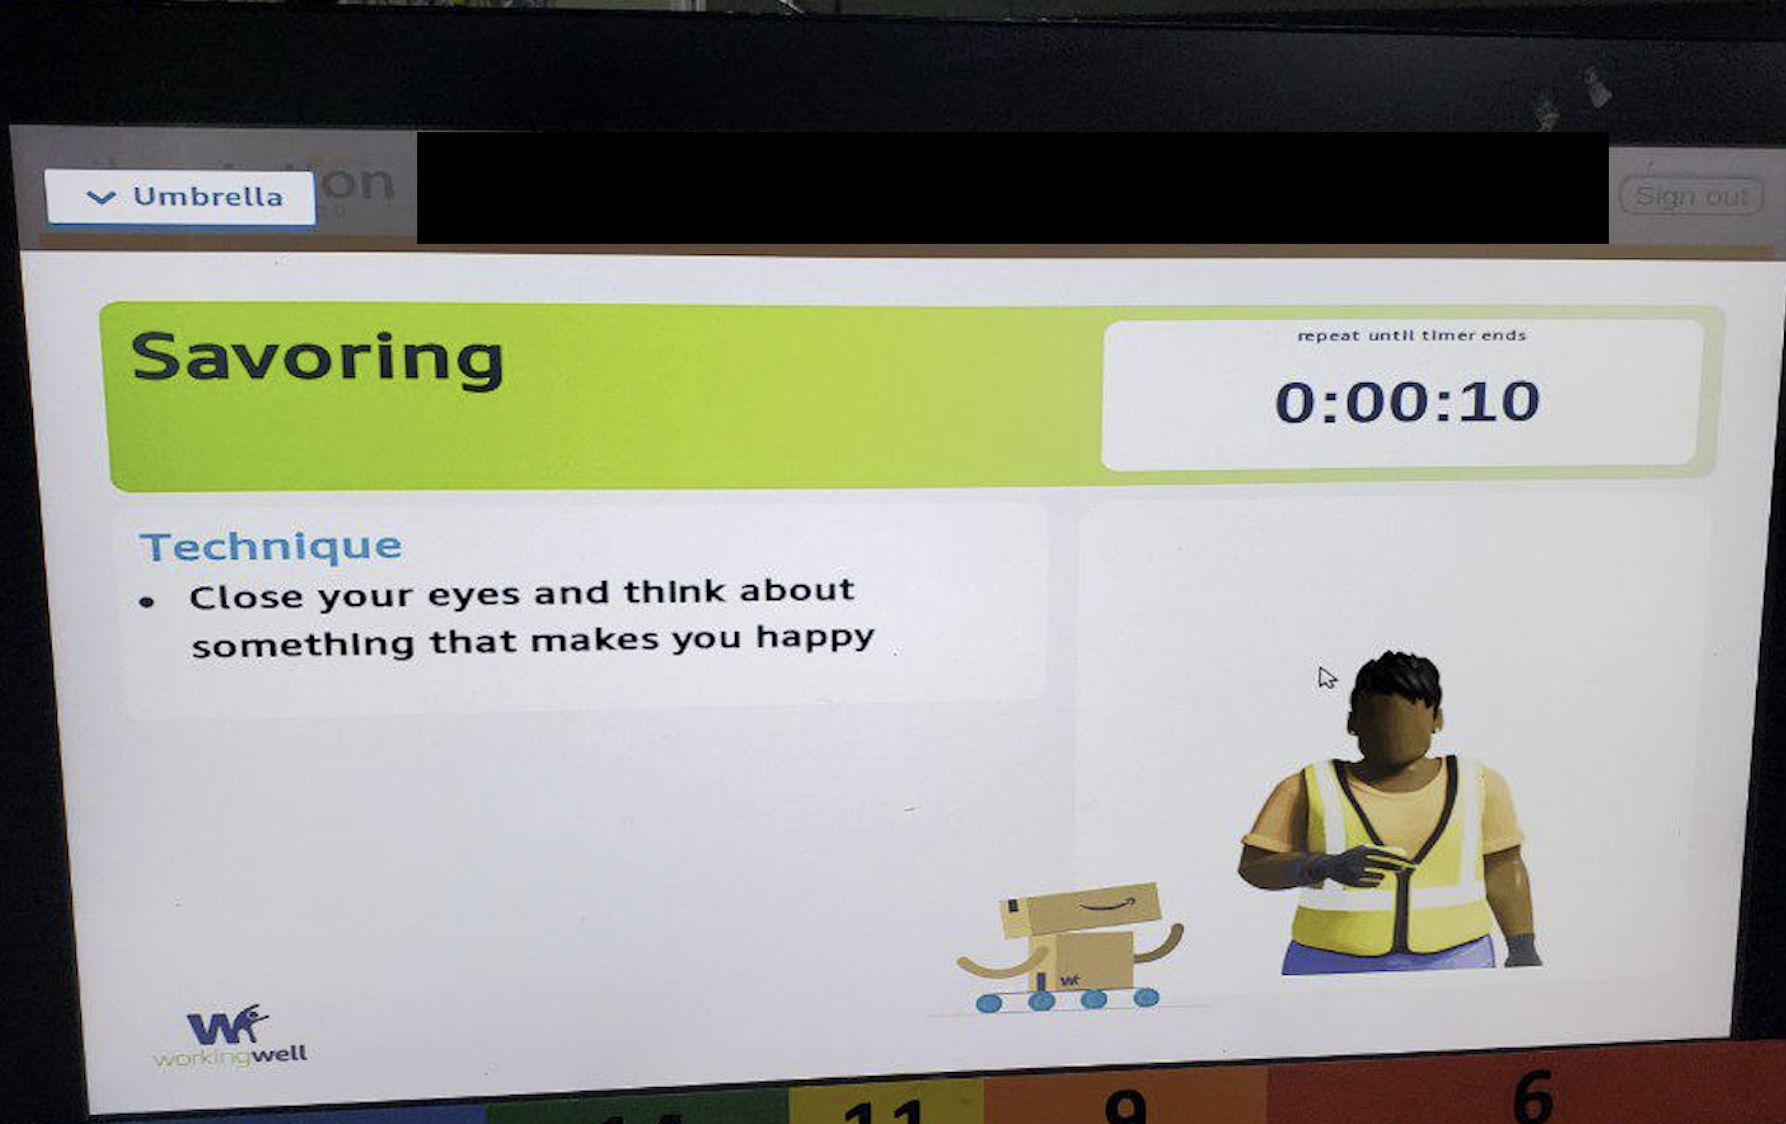 An image of a screen at a fulfillment center showing instructions for "savoring"